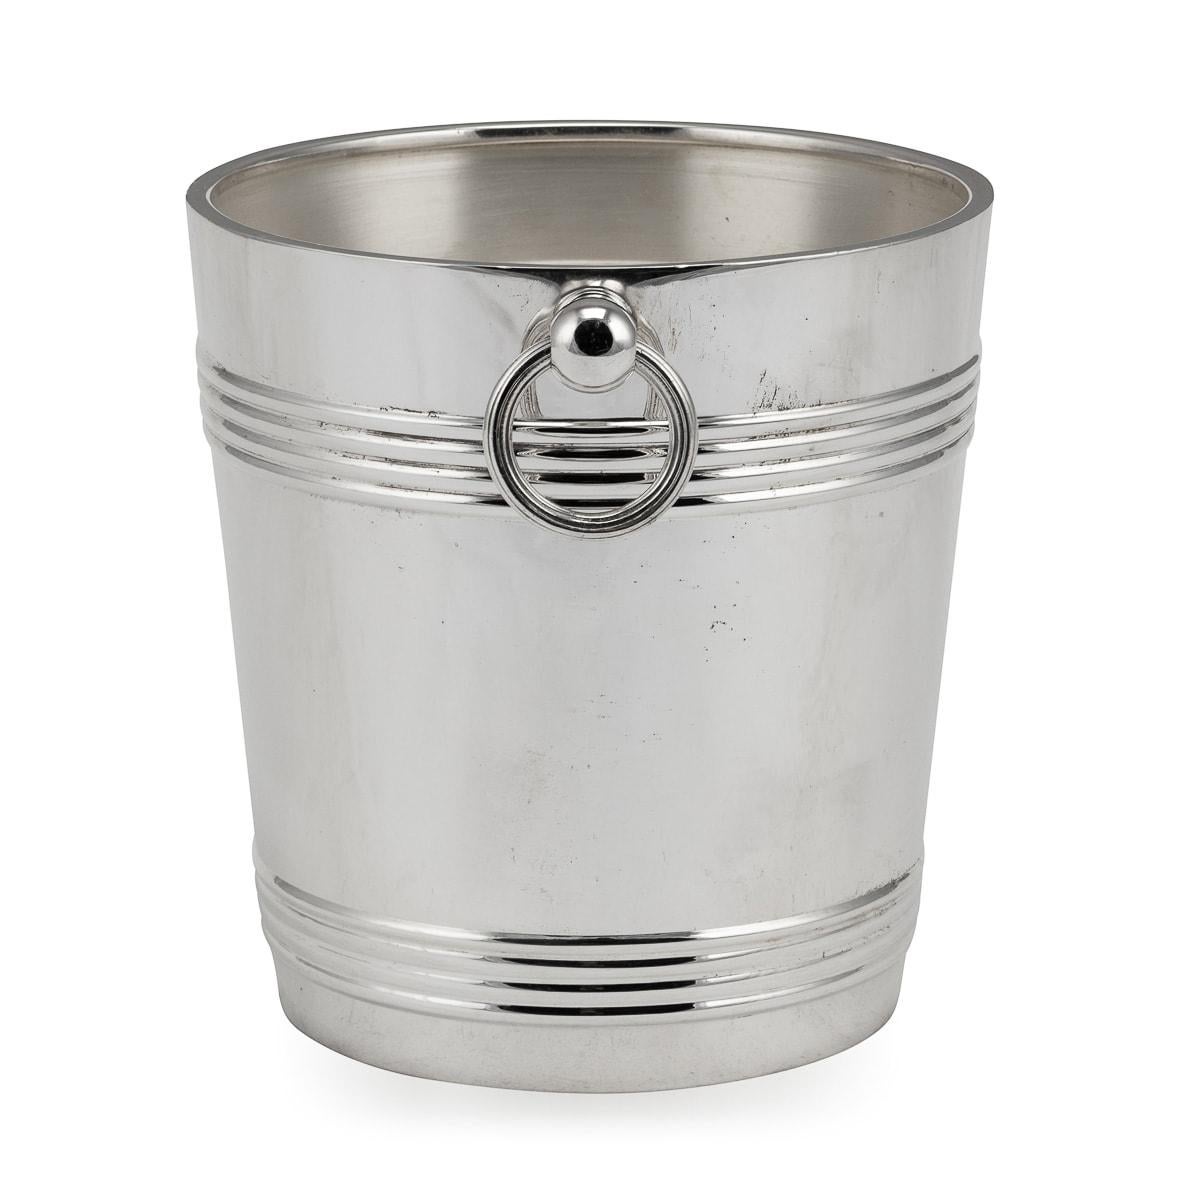 20th Century French Silver Plated Wine Cooler By Christofle In Good Condition For Sale In Royal Tunbridge Wells, Kent